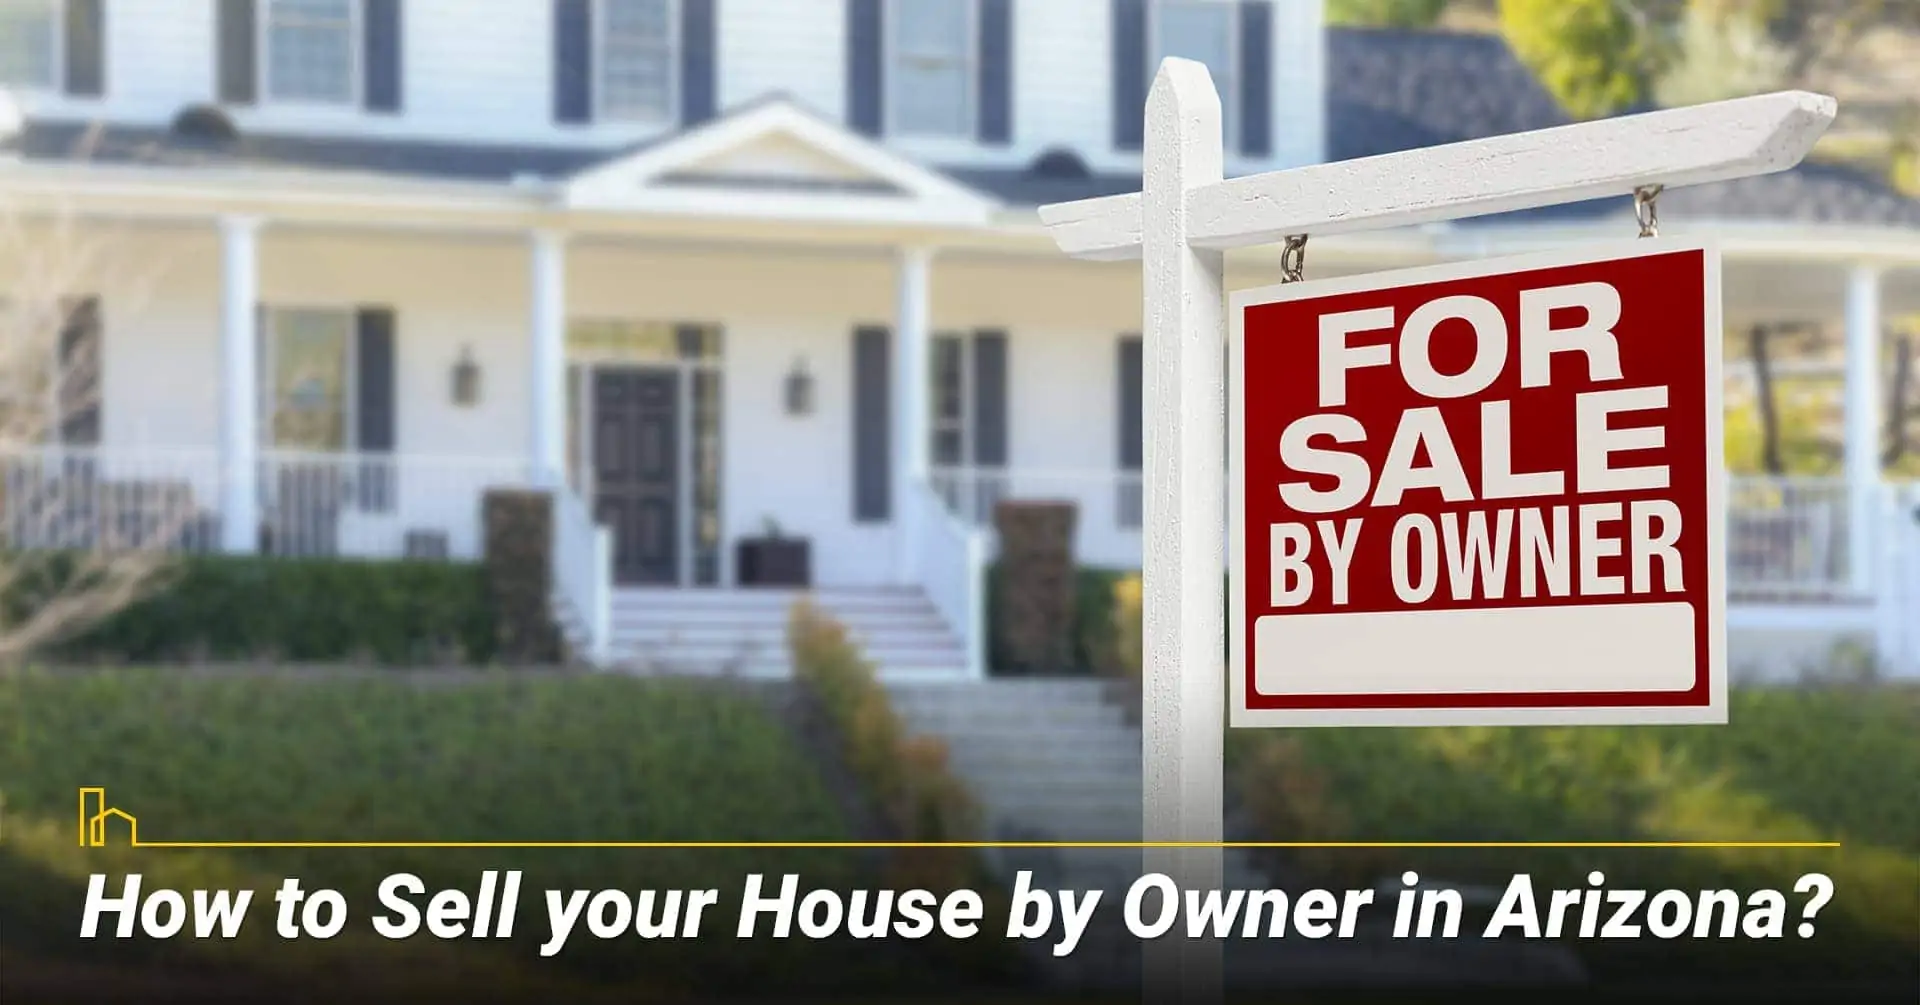 How to Sell your House by Owner in Arizona? ways to sell your own home in Arizona